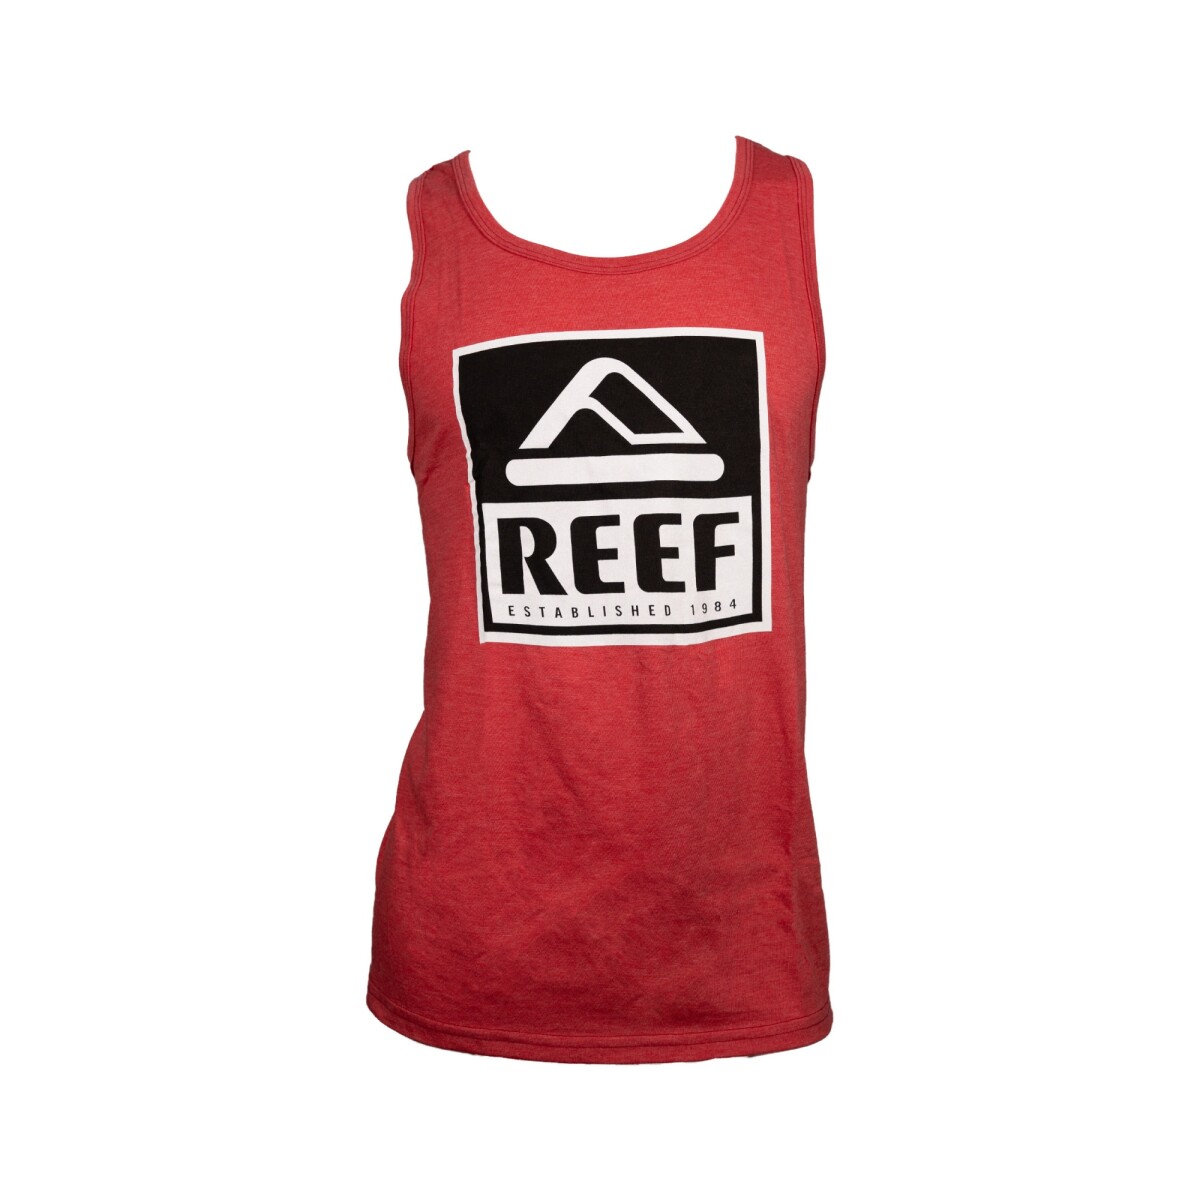 Musculosa Reef 00B46ARDH - RED 